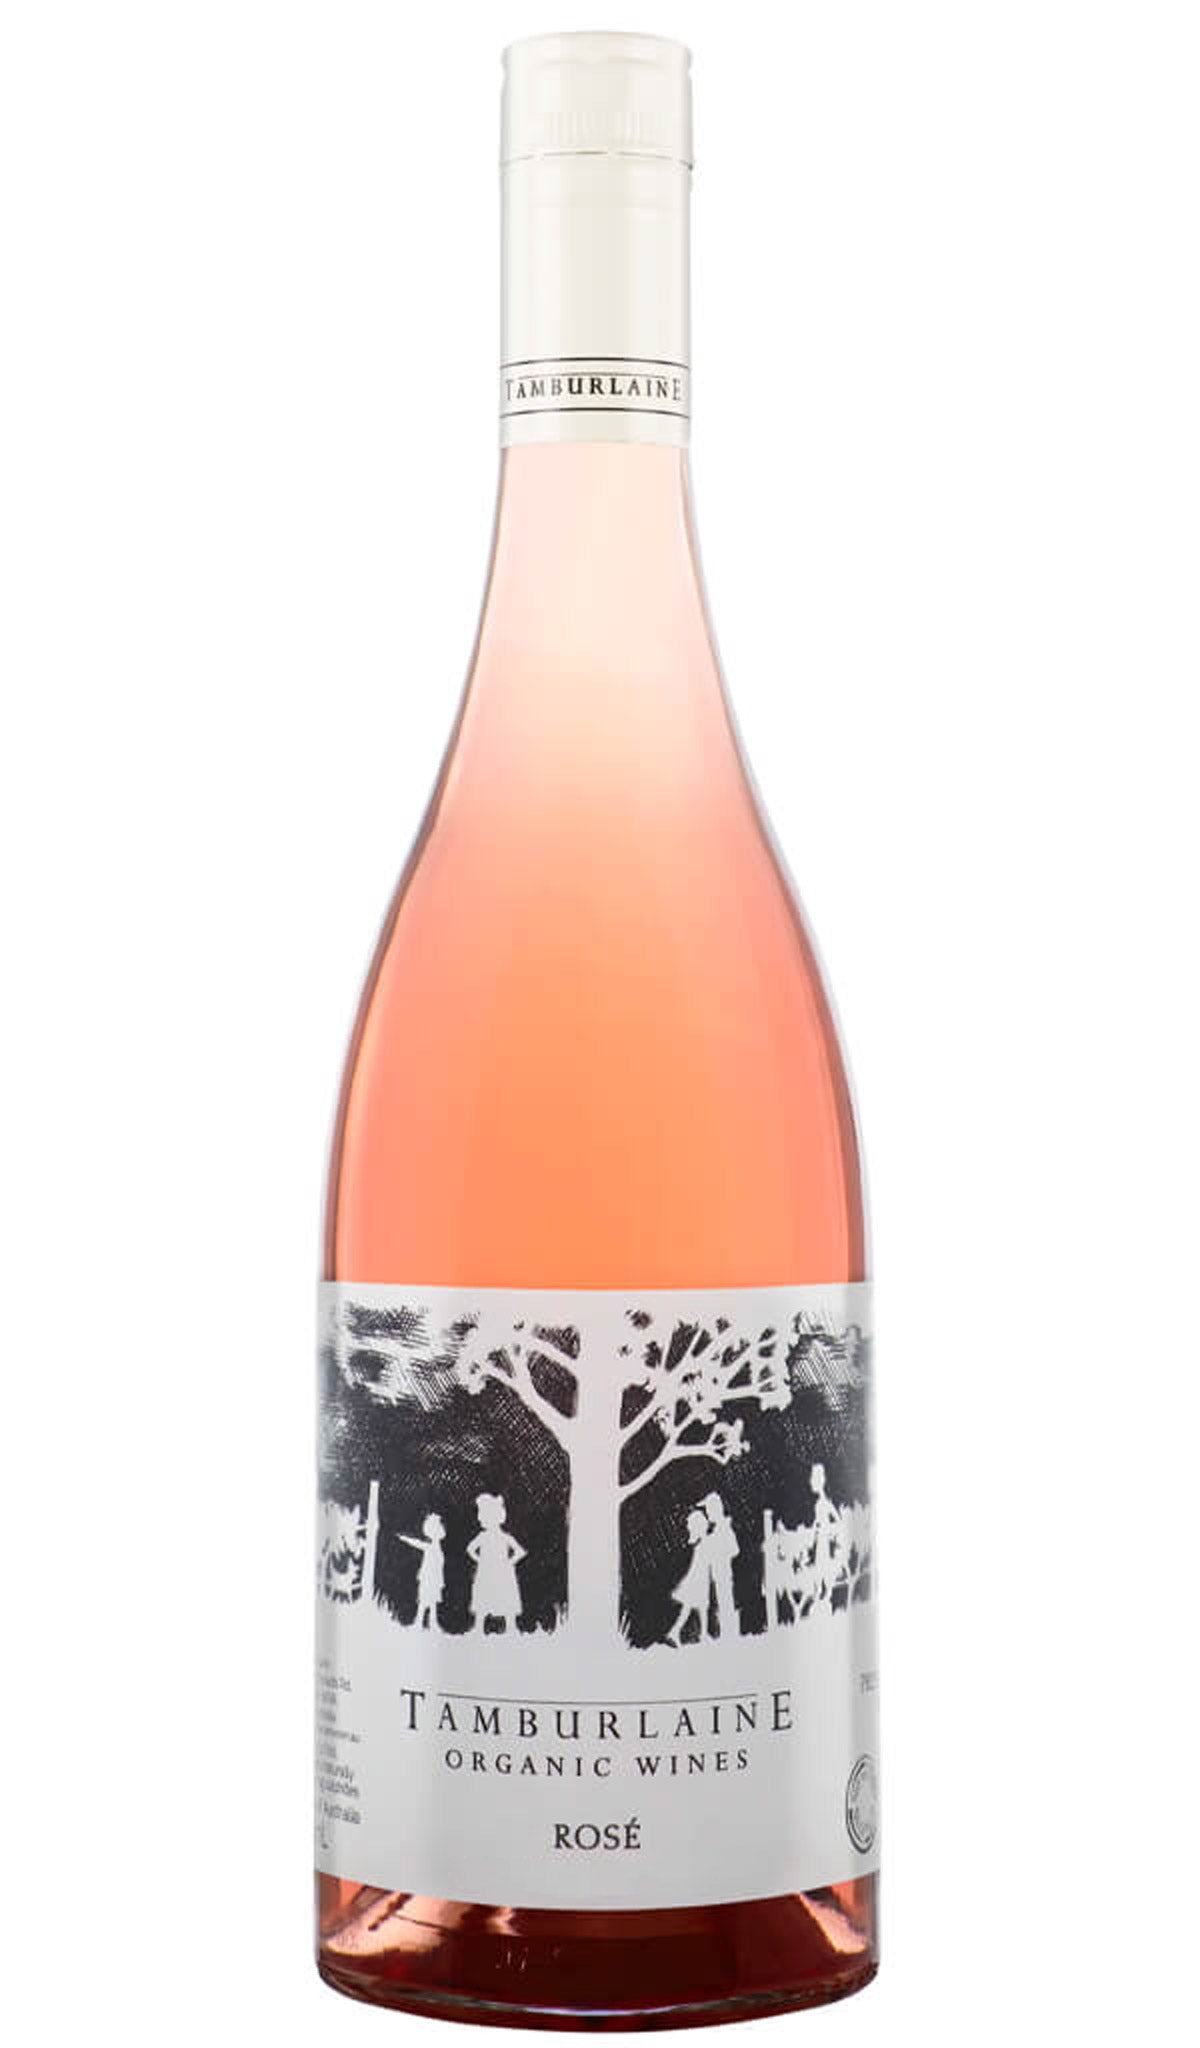 Find out more or buy Tamburlaine Organic Preservative Free Rosé 2022 online at Wine Sellers Direct - Australia’s independent liquor specialists.